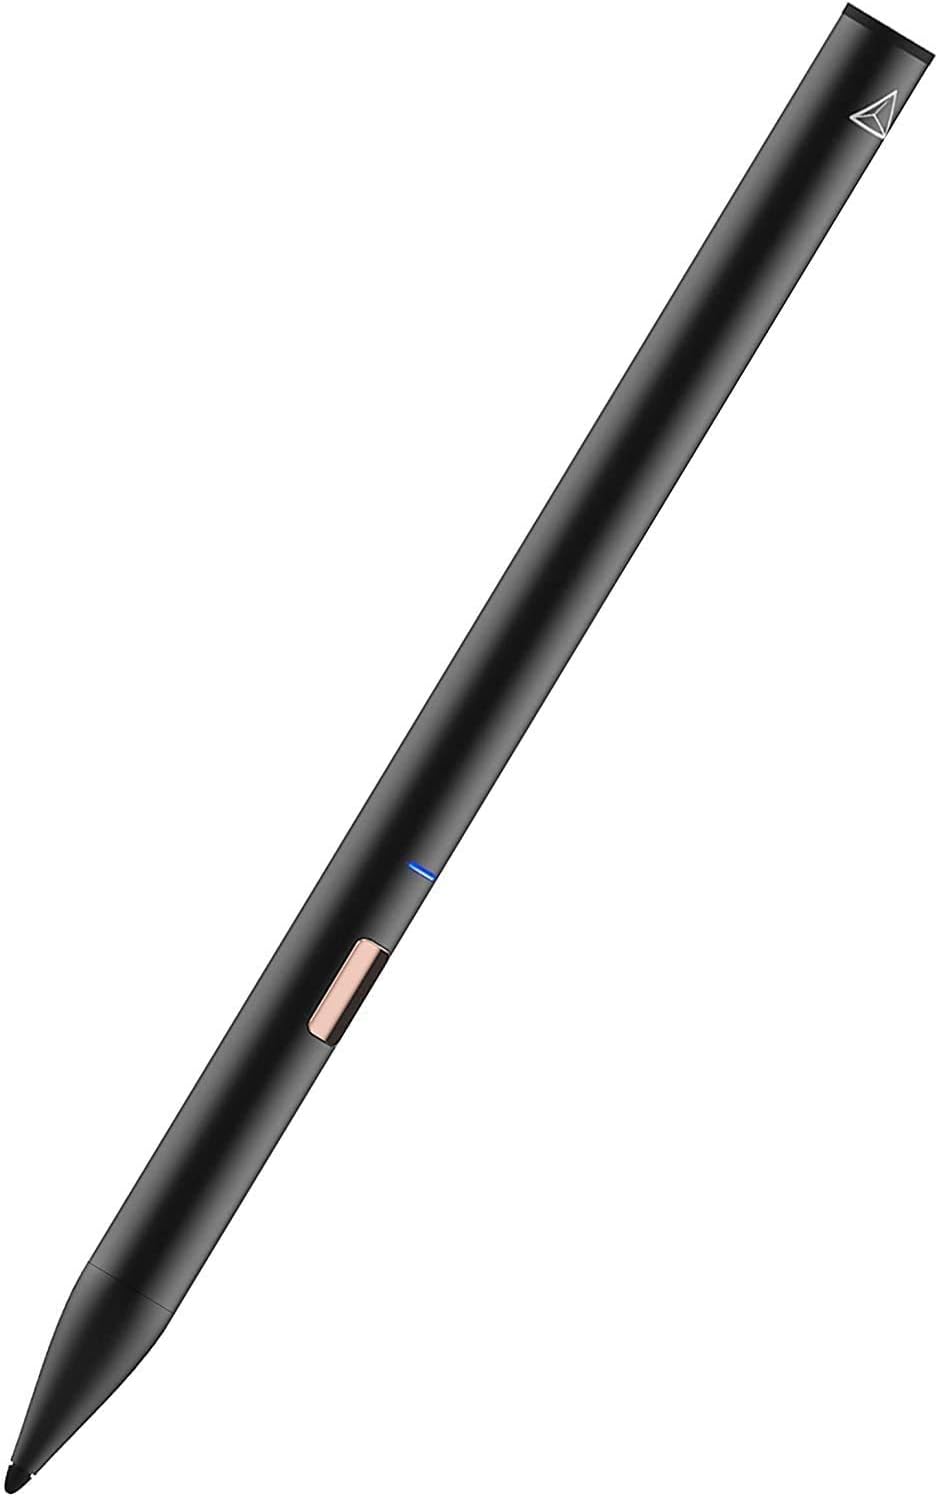 Adonit Note NC(Black) Stylus Pen for iPad [...]